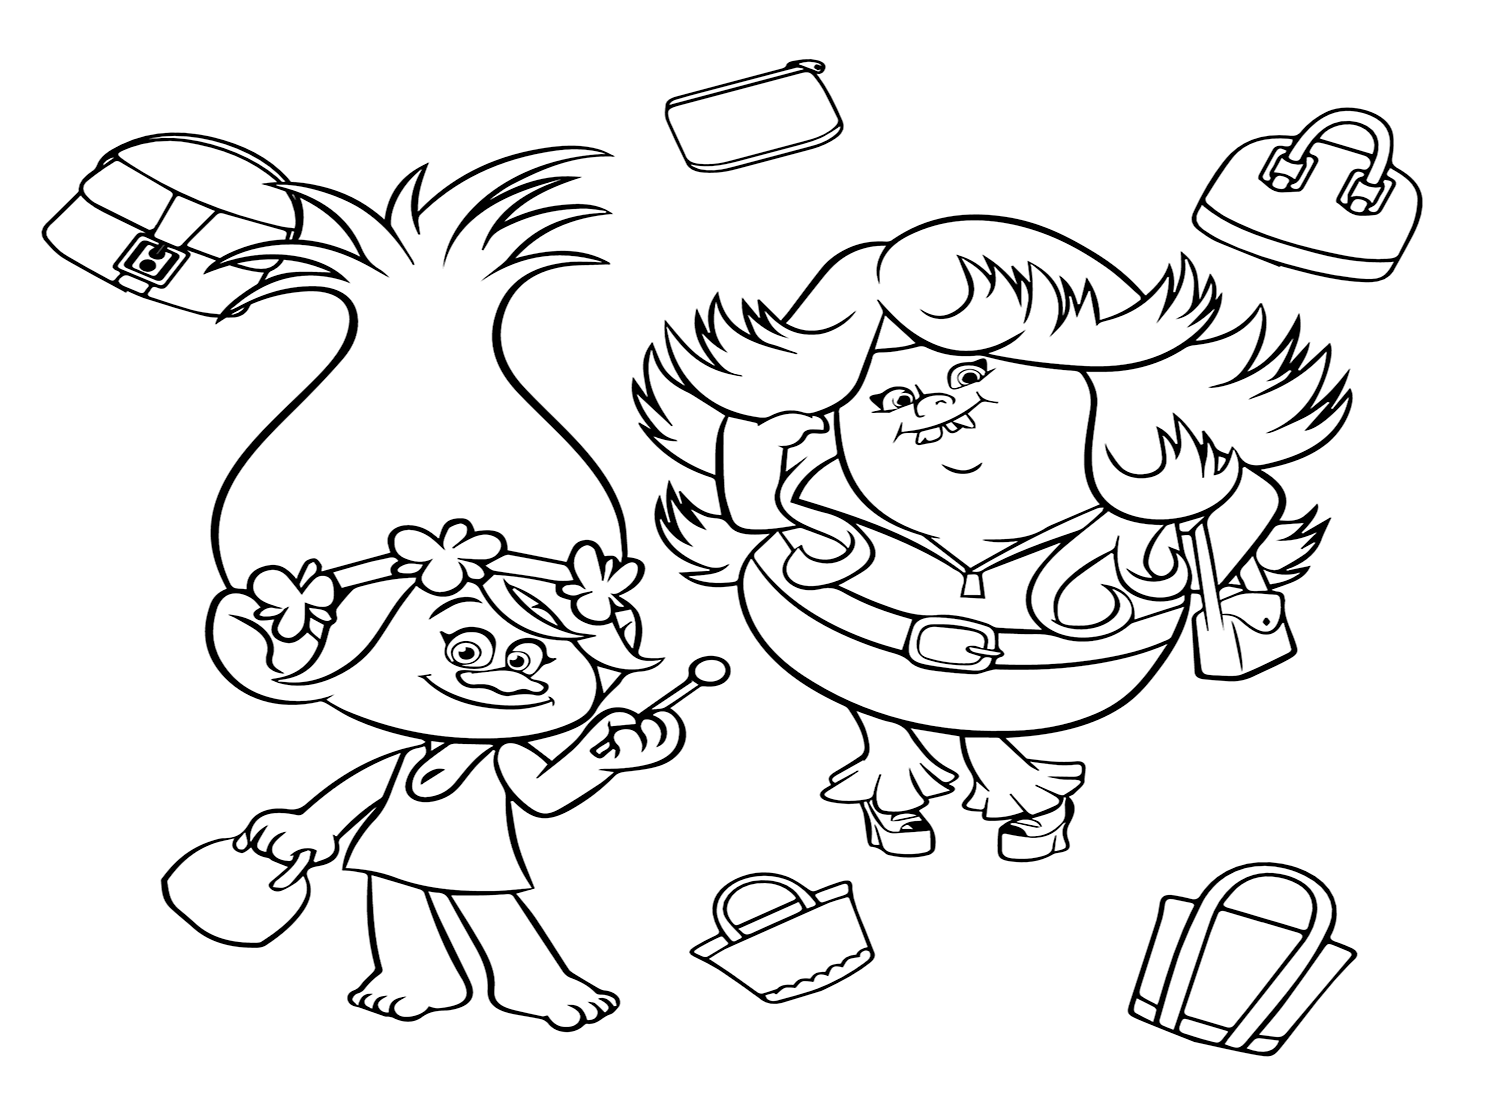 Trolls World Tour to Print Coloring Page